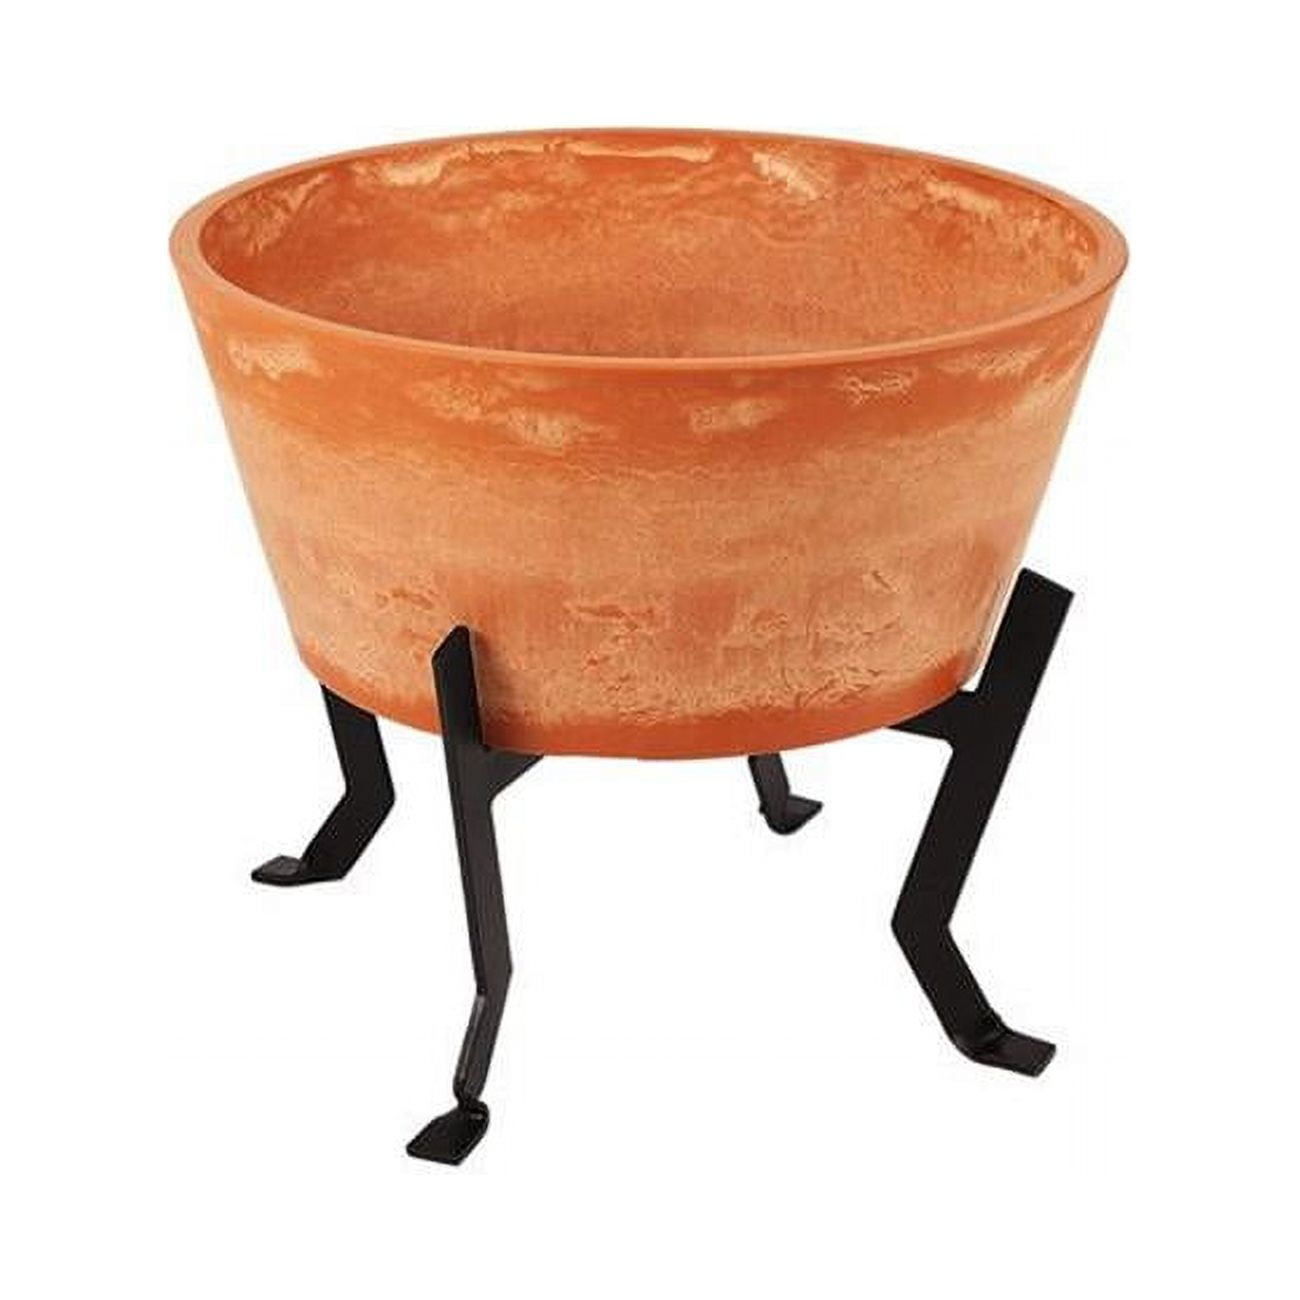 Achla Fb-59-s Denise Planter I With Stand, Terracotta